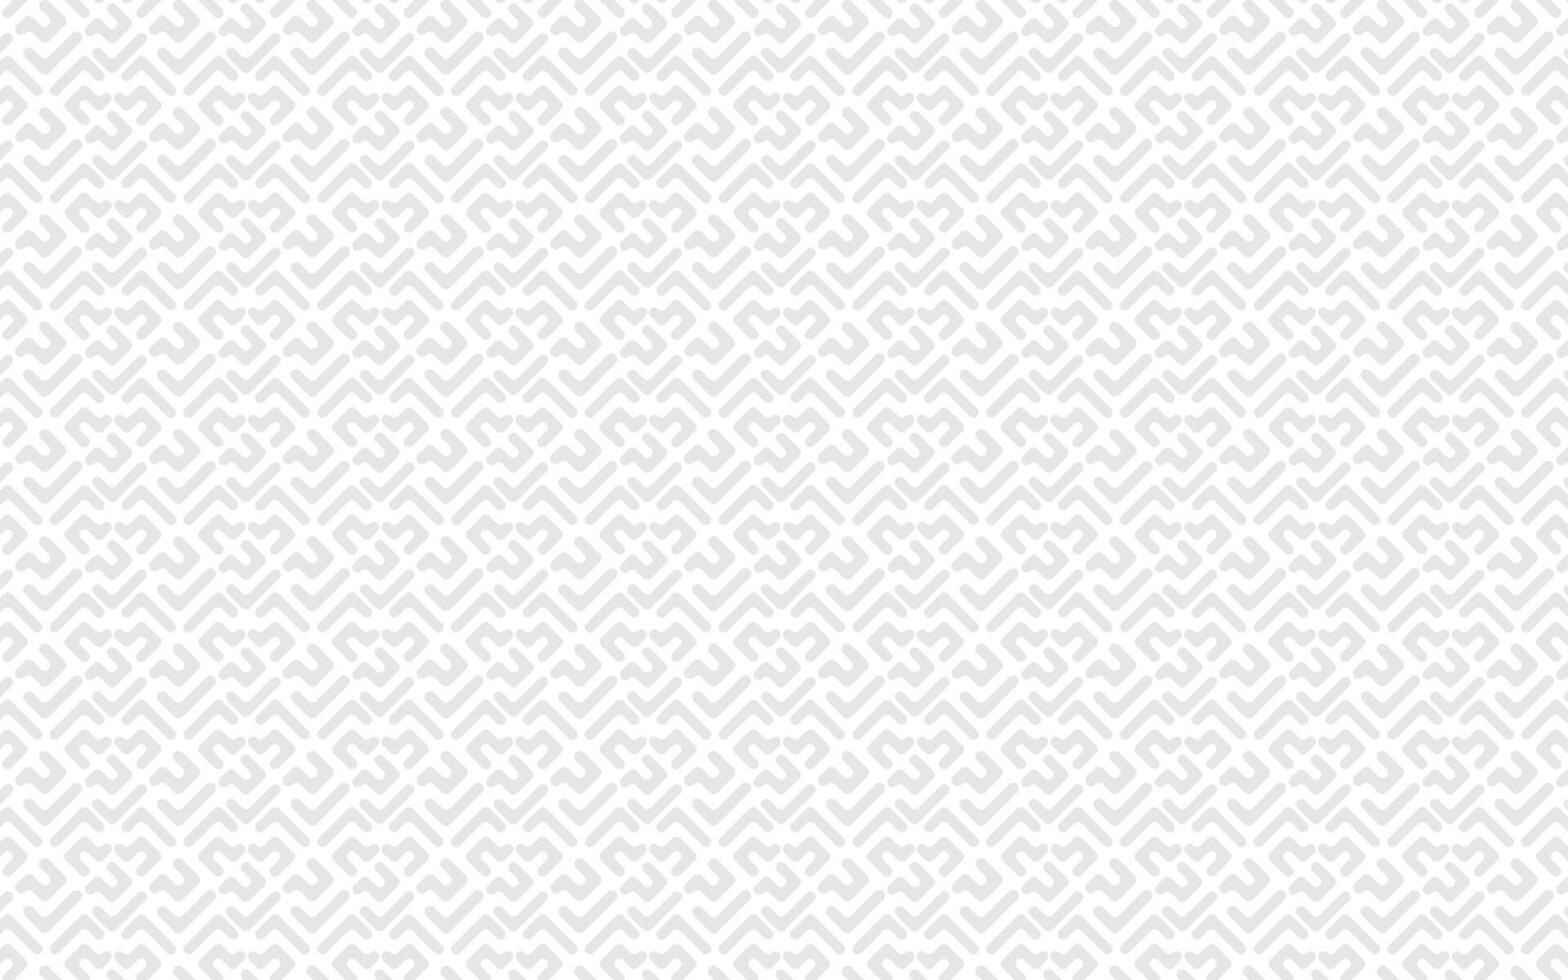 Minimal geometric white pattern and background design vector